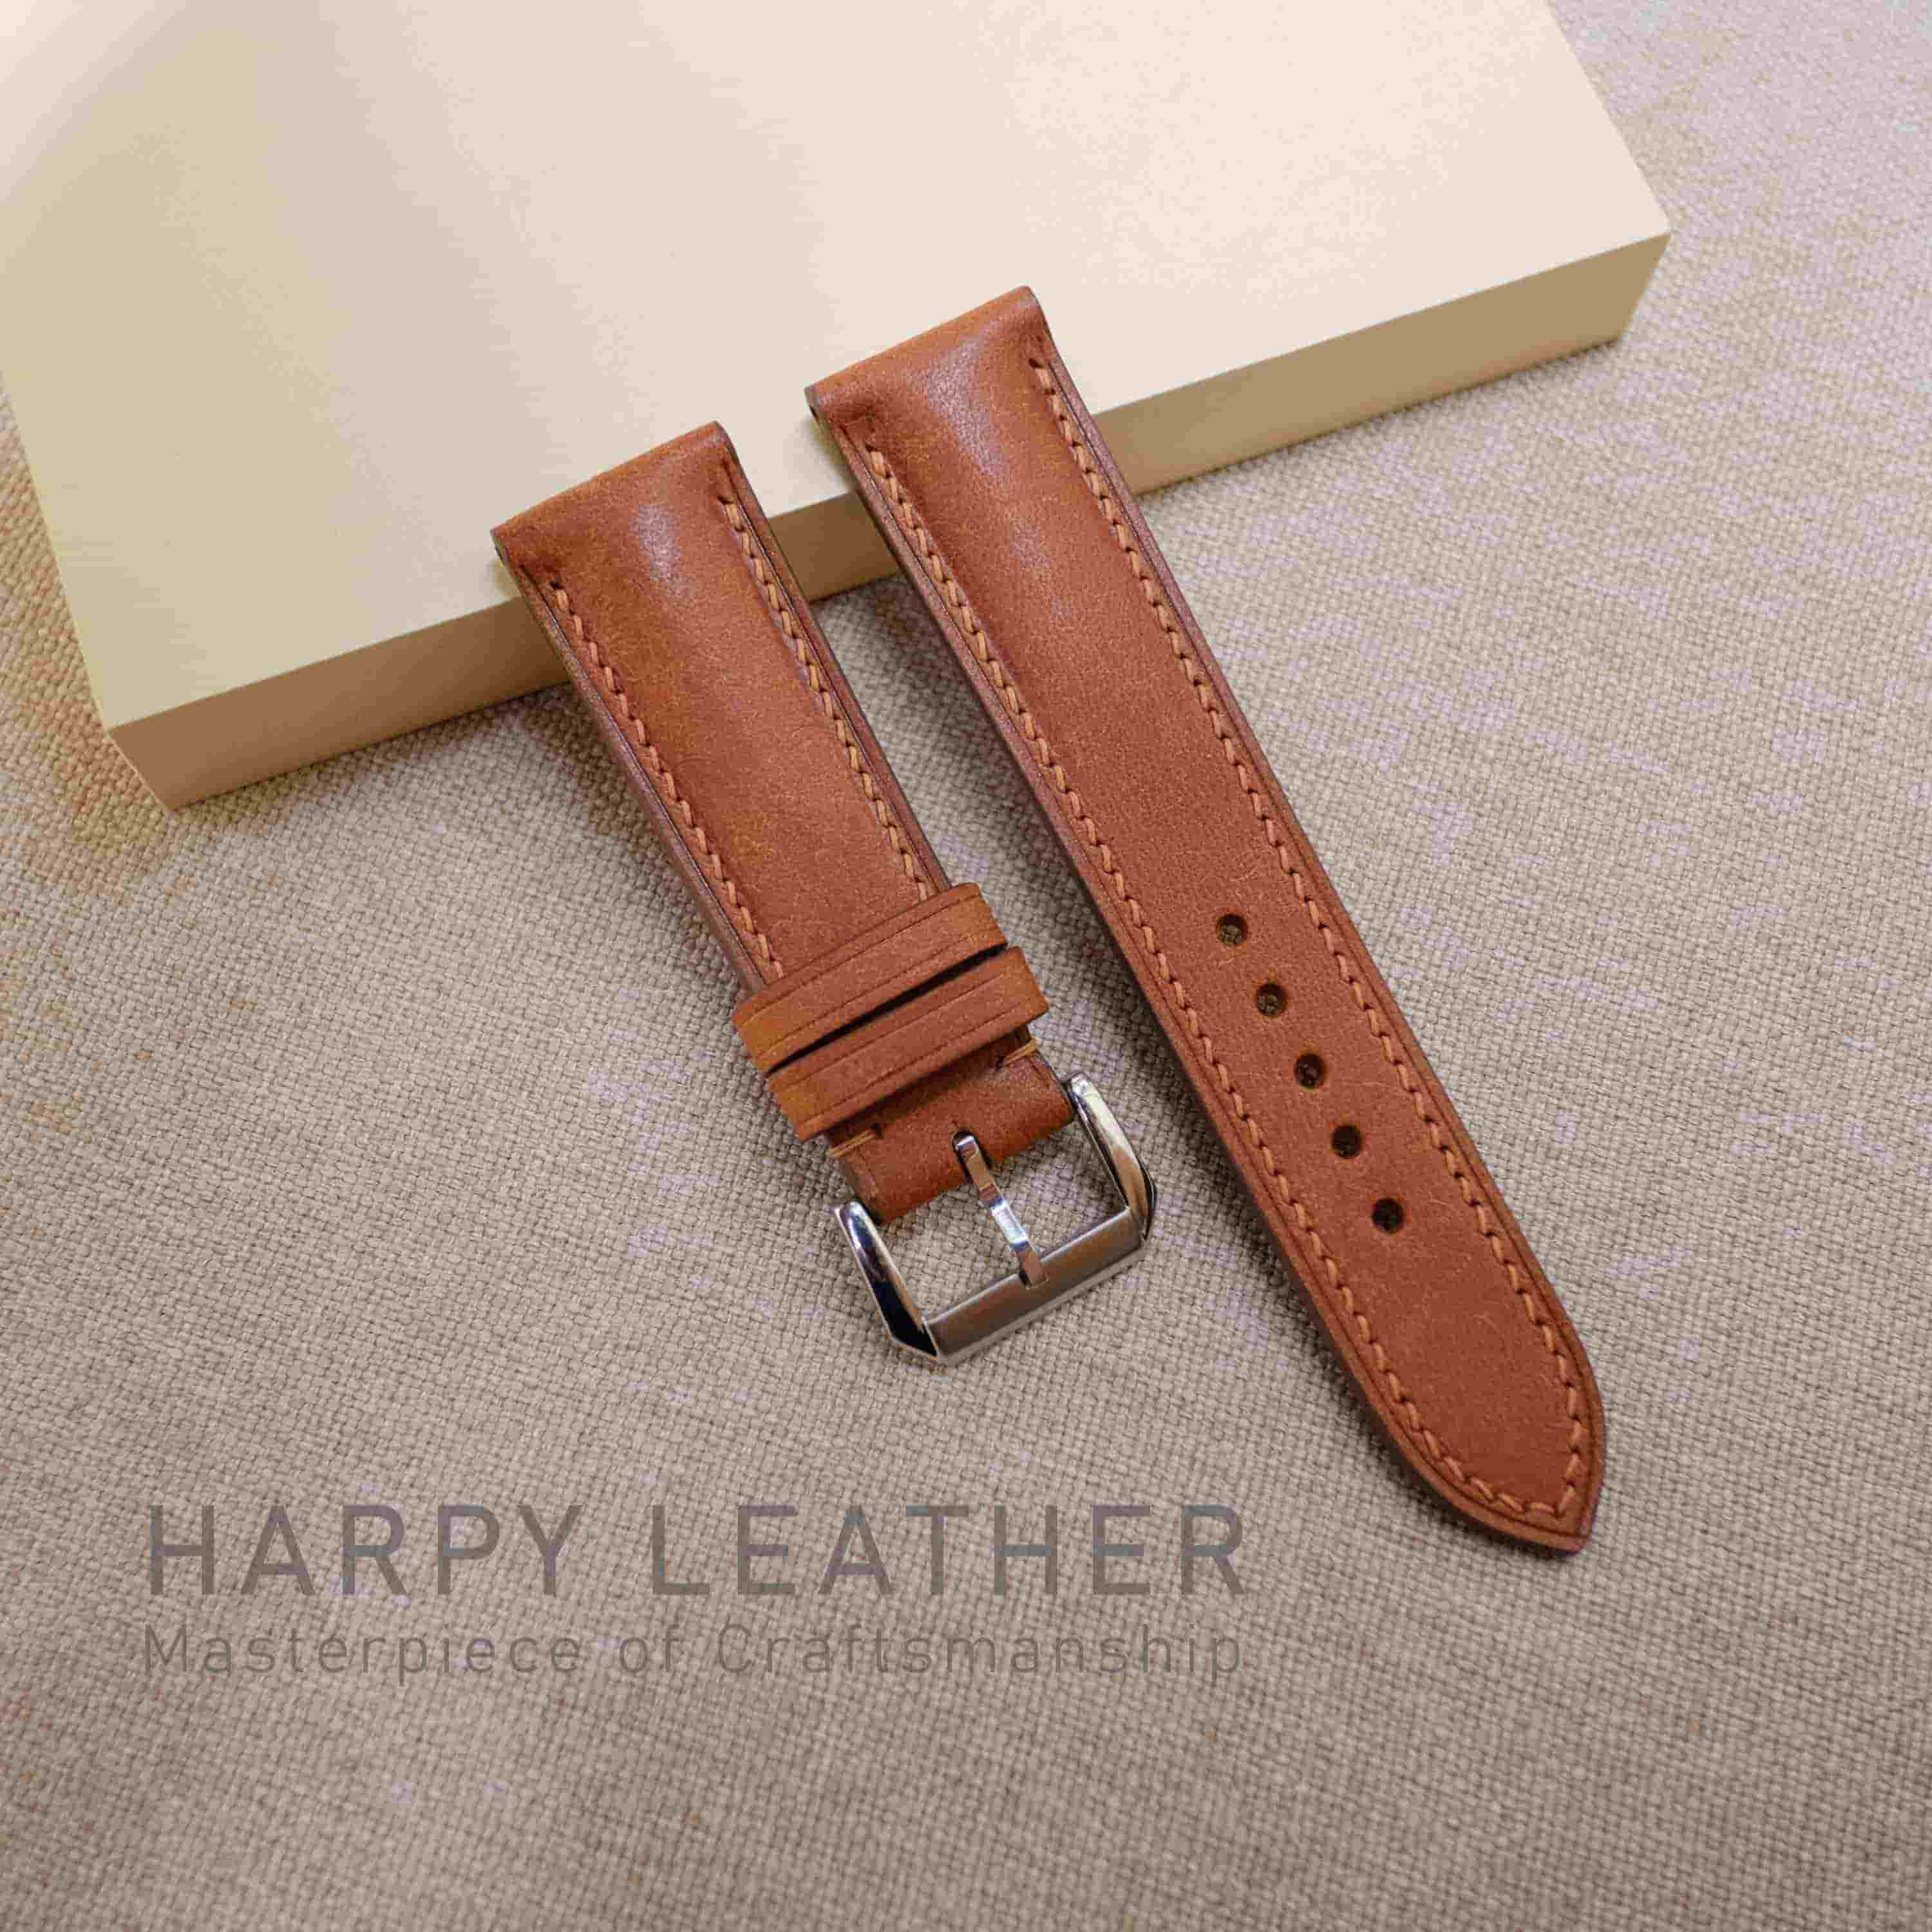 Cognac leather watch strap - handmade leather watch strap & band